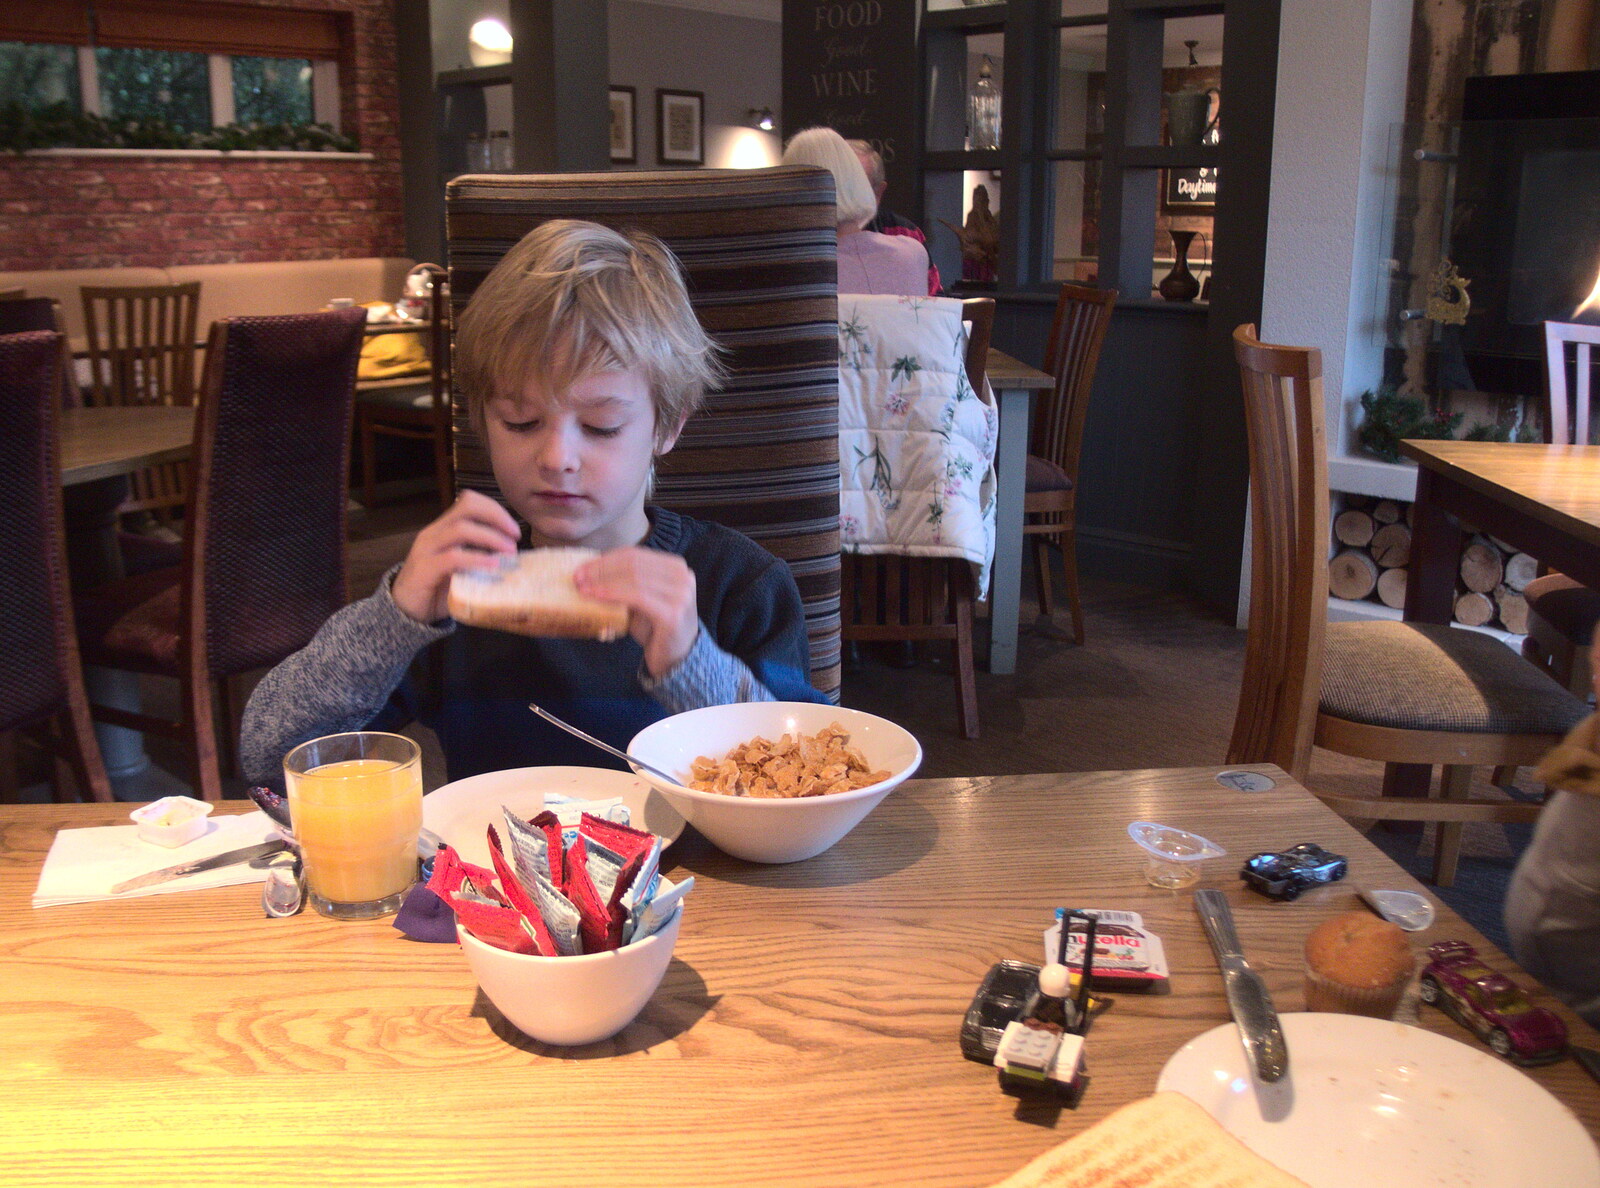 Harry has Crunchy Nut cornflakes for breakfast from Thanksgiving in Highcliffe, Dorset - 23rd November 2018